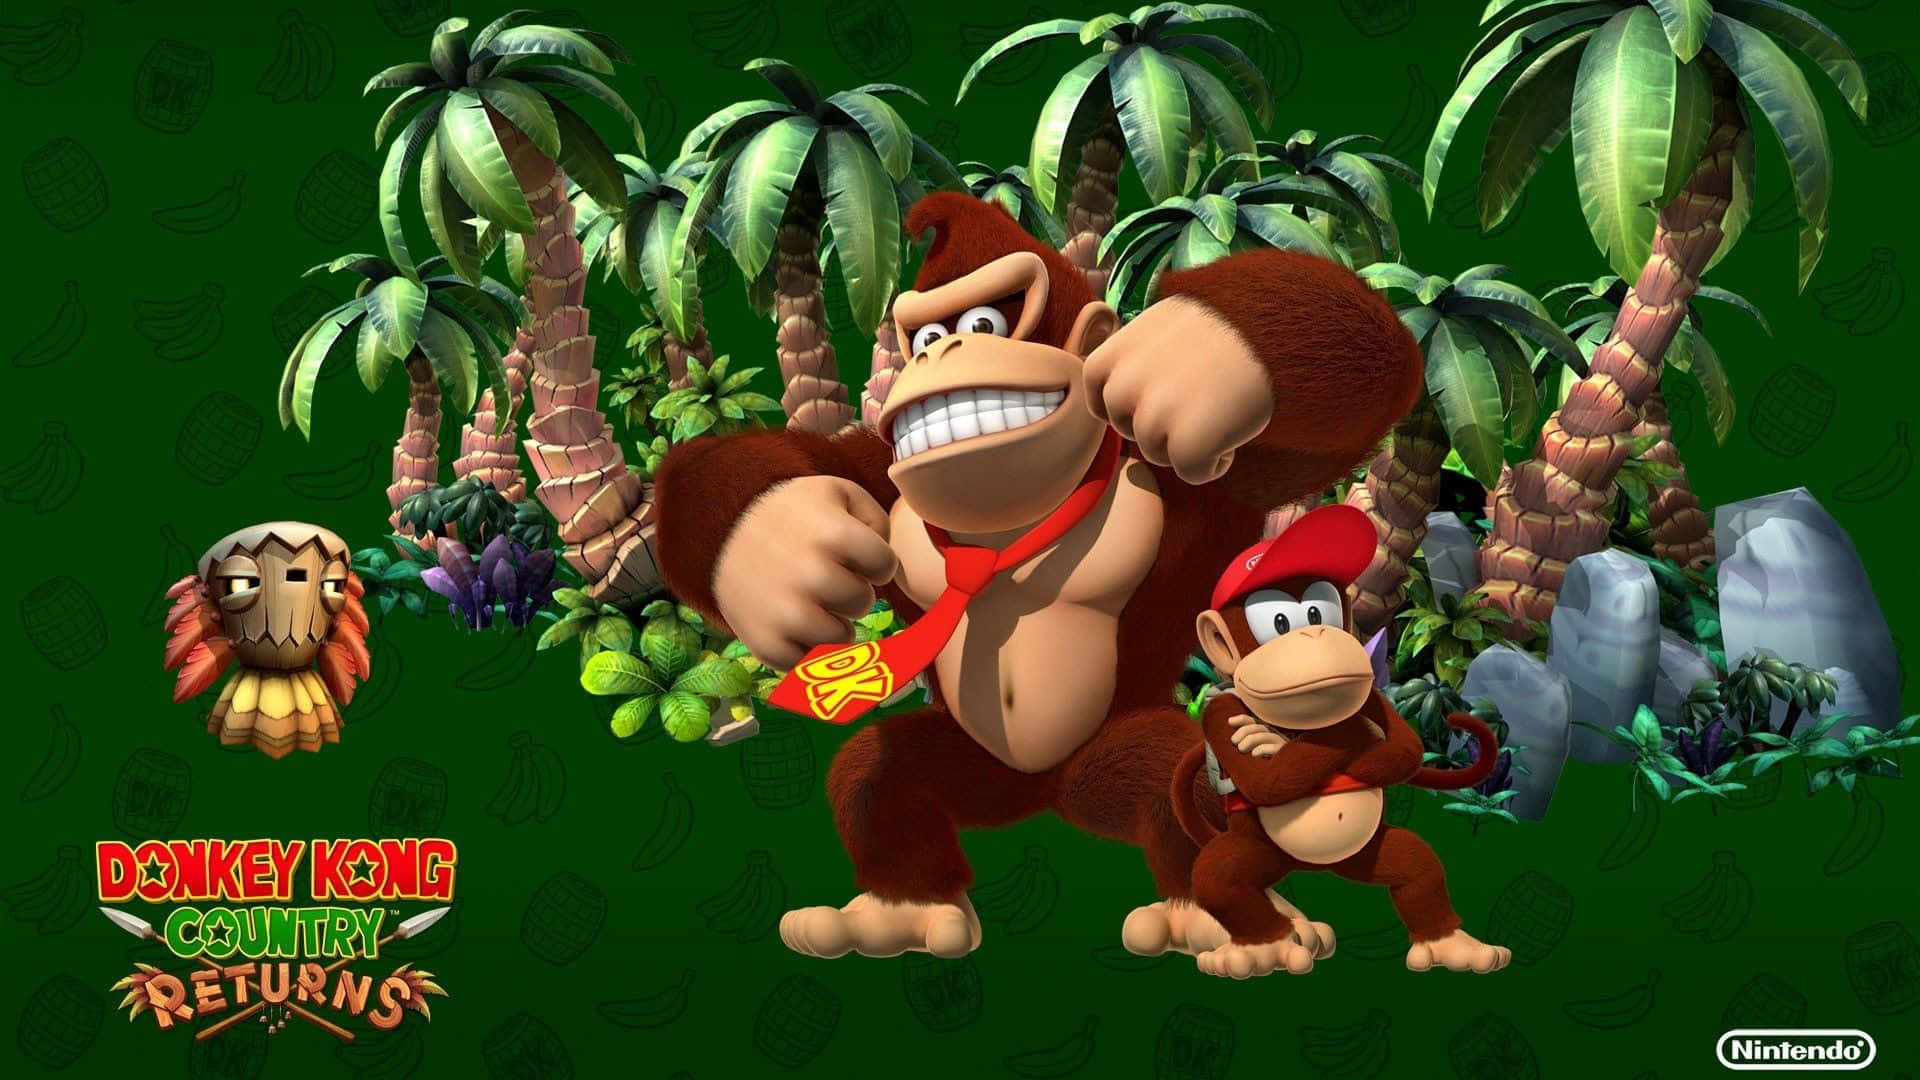 Donkey Kong In Action Against His Adversaries In An Exciting Arcade Game Setting.